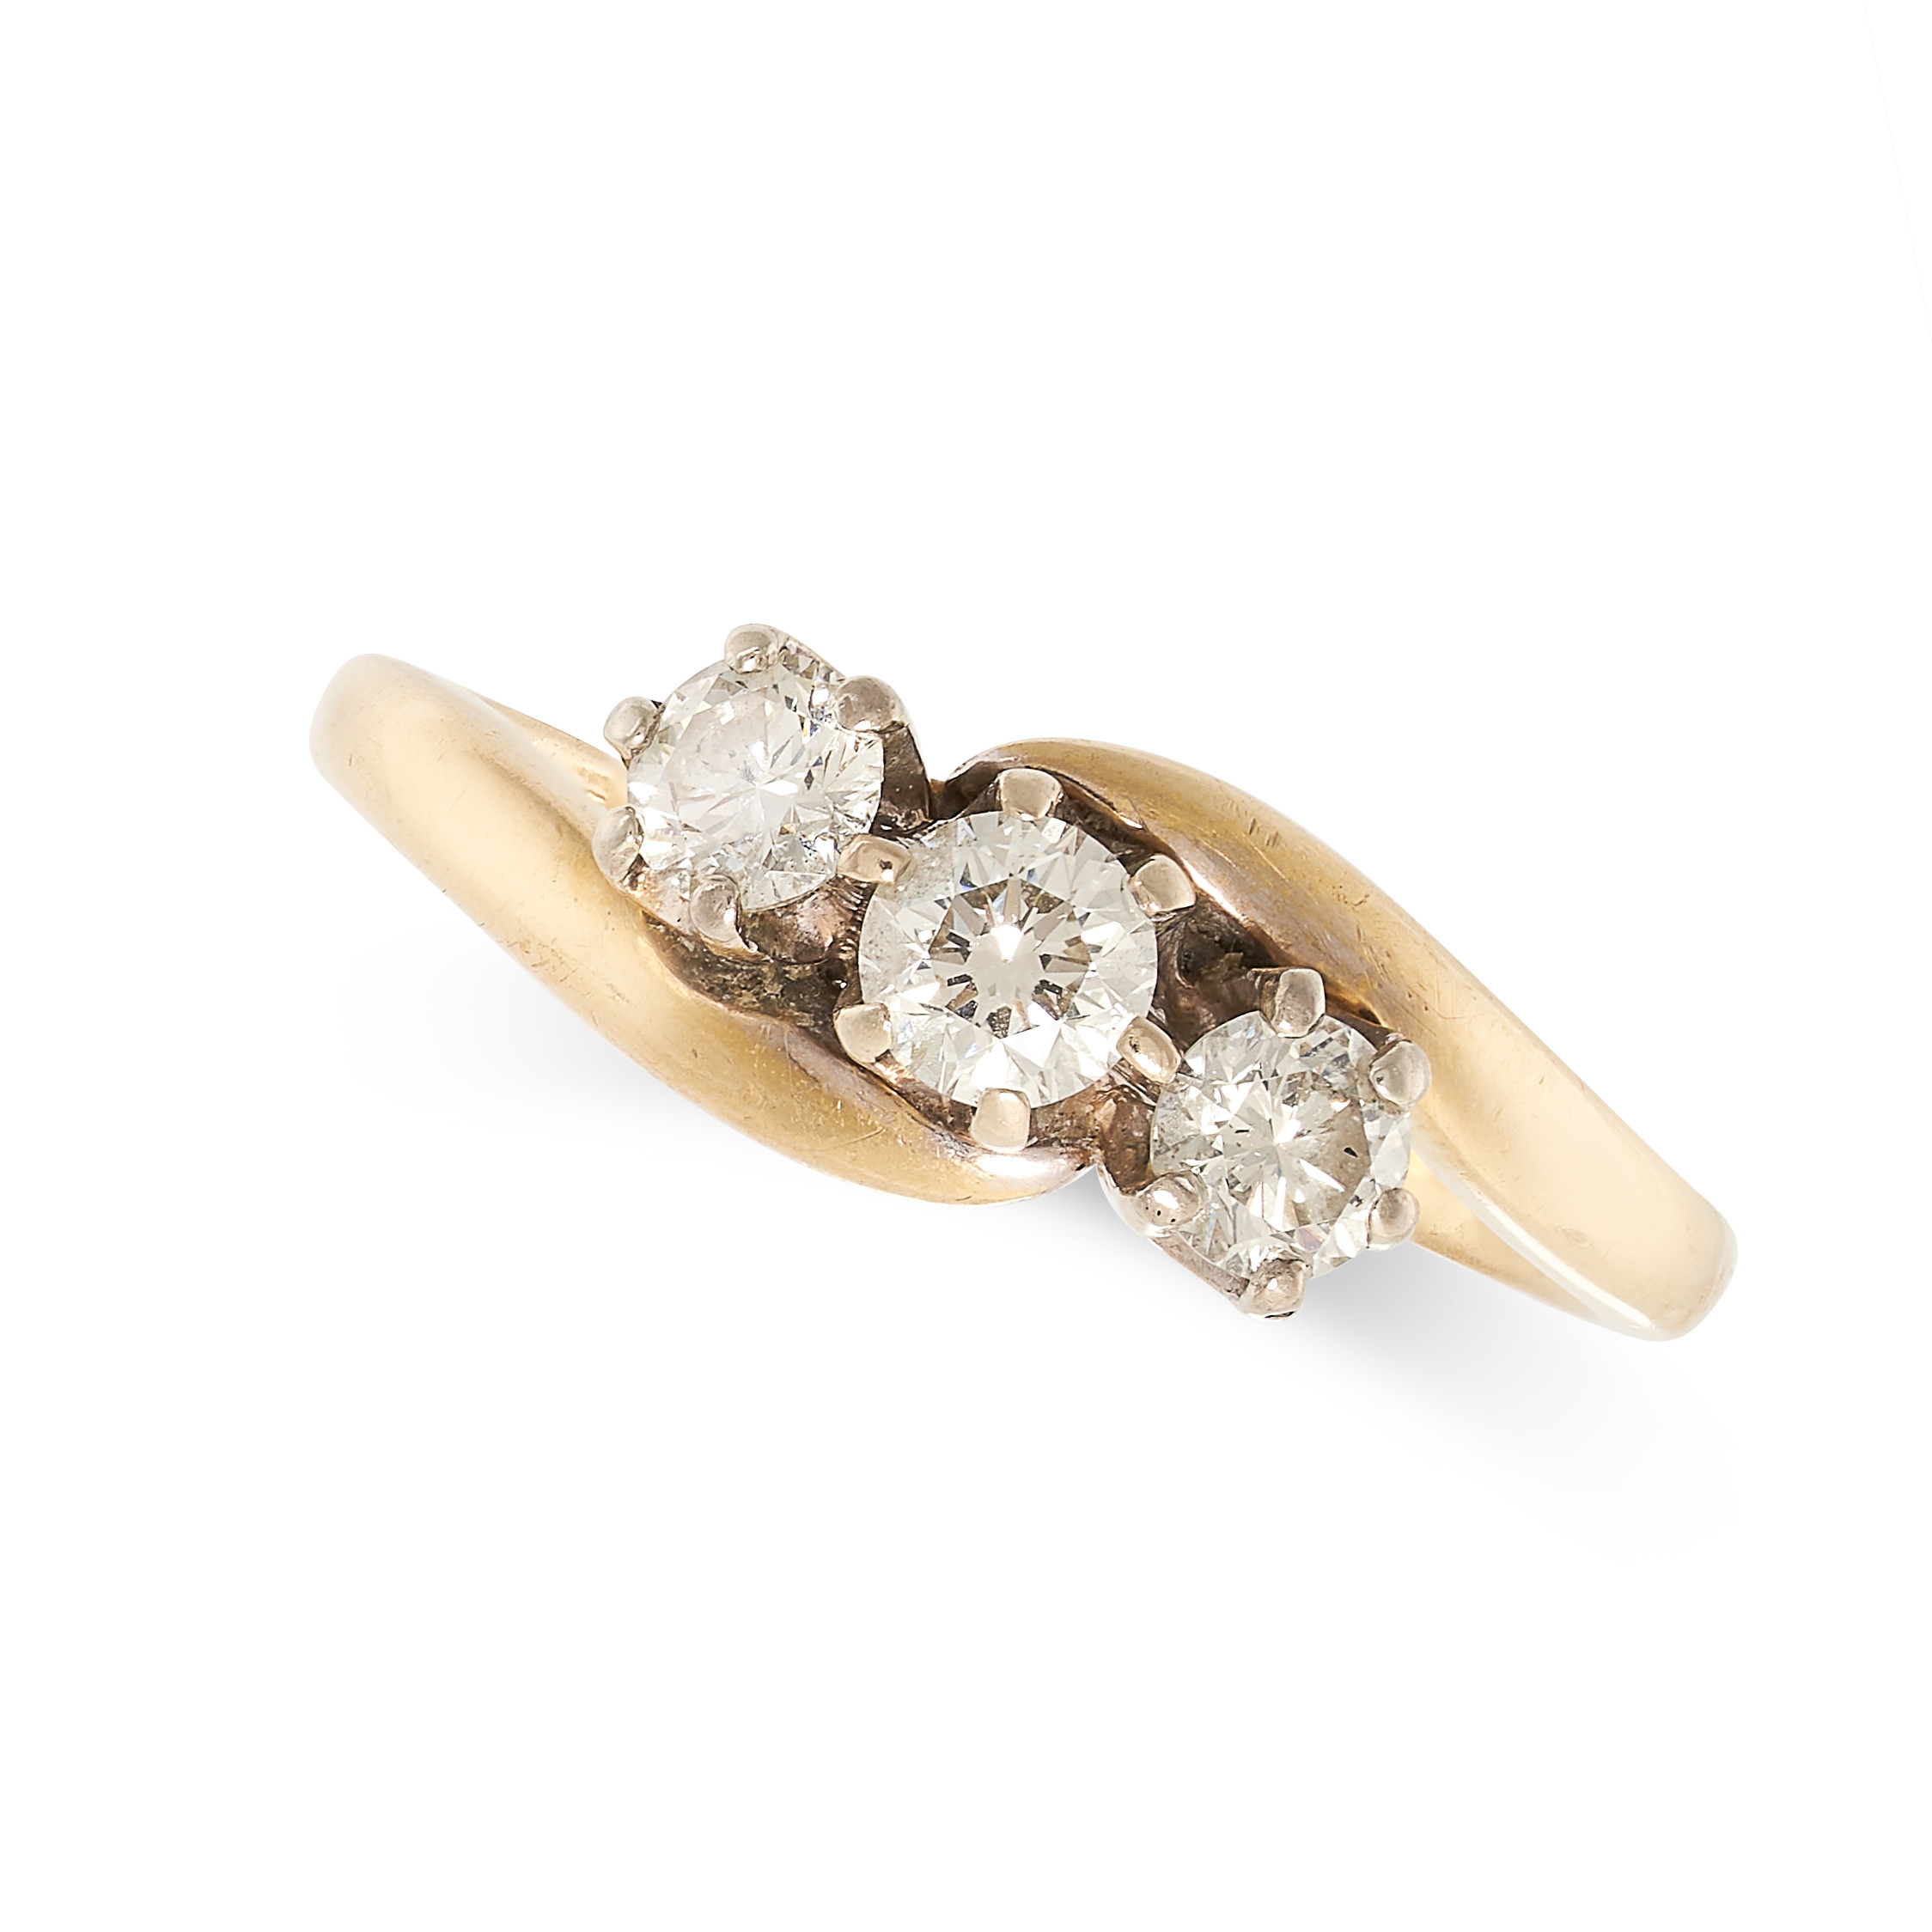 NO RESERVE - A DIAMOND THREE STONE RING in 18ct yellow gold, set with a trio of graduated round